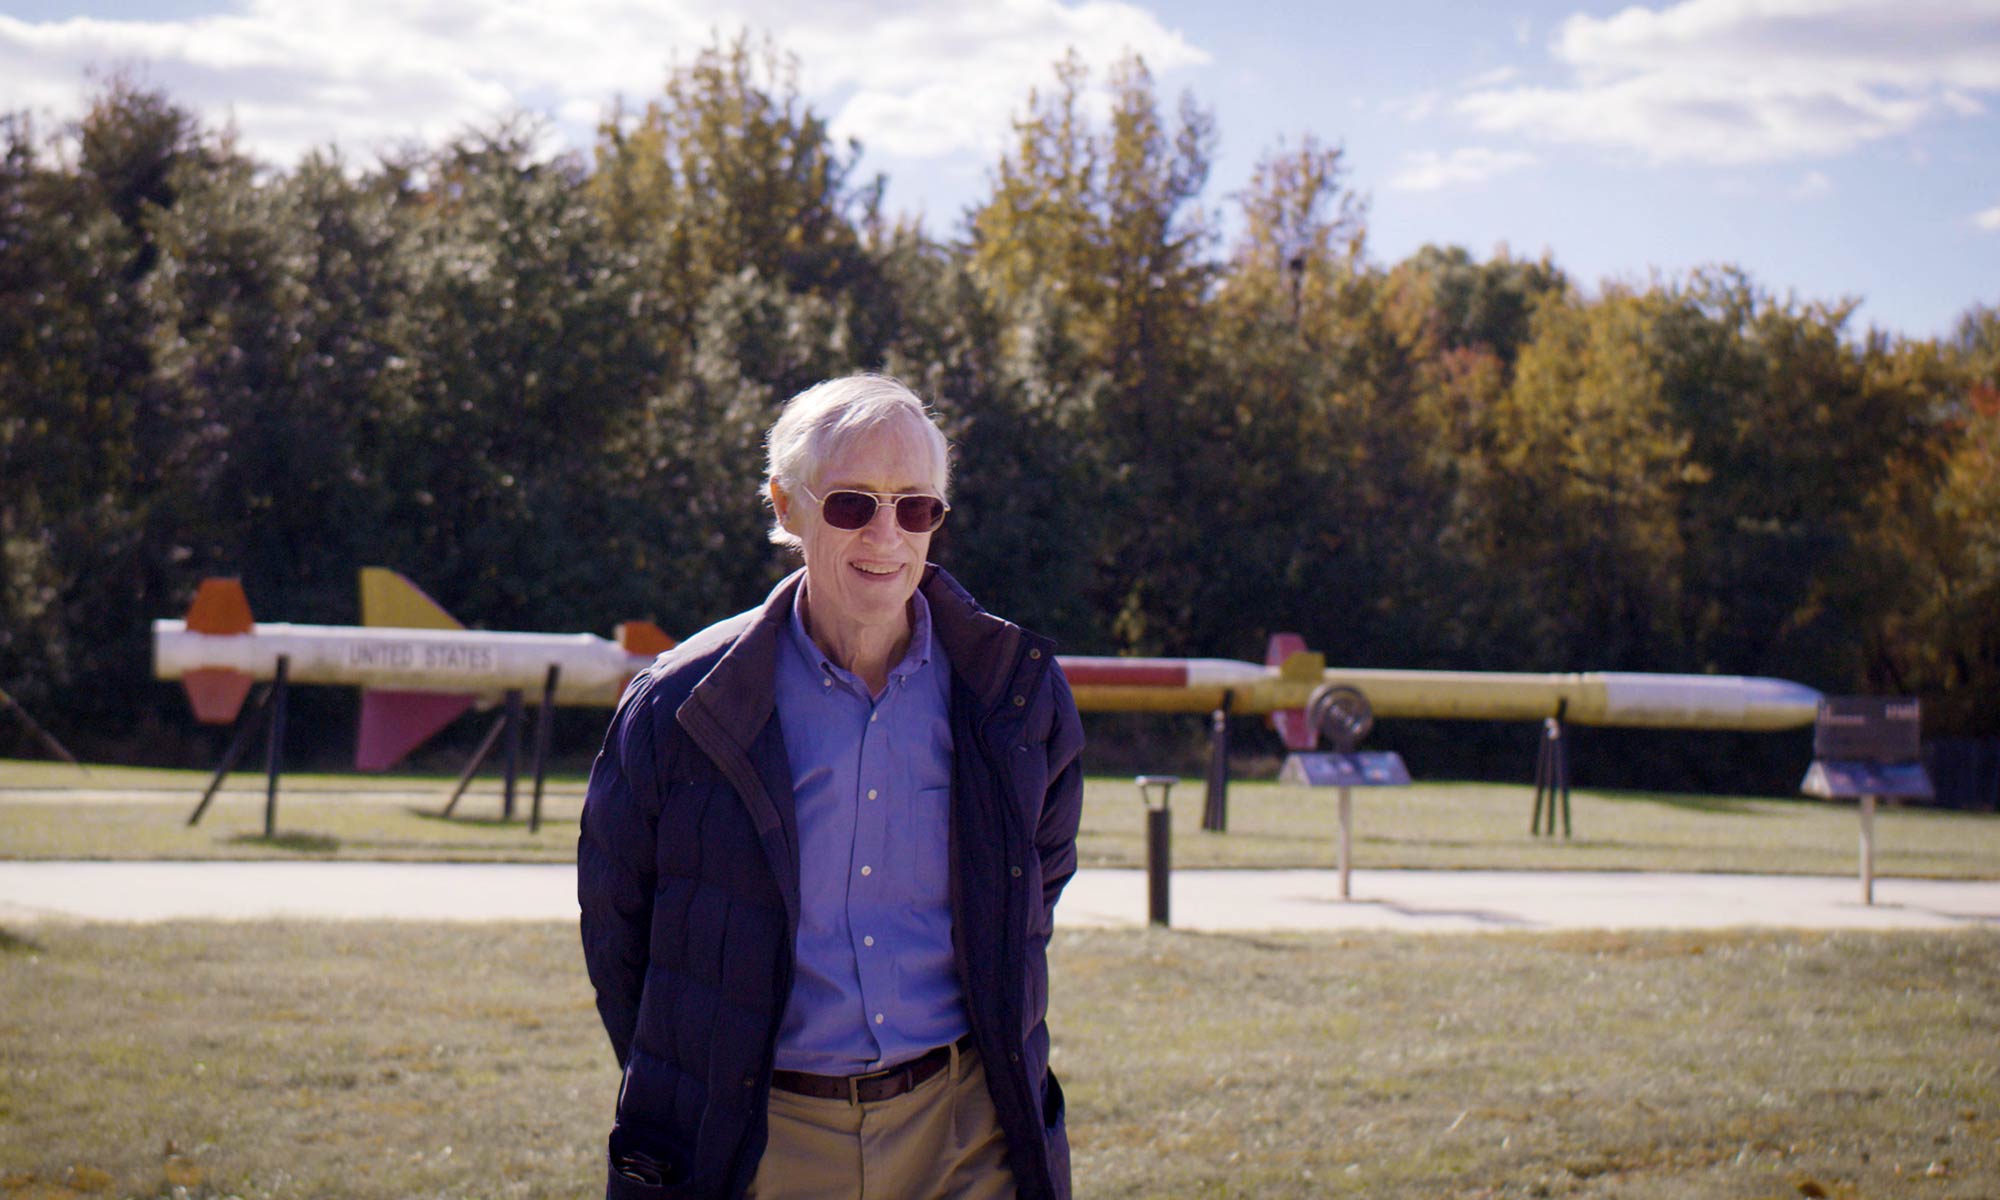 This photo shows John Mather standing in front of rockets at the space flight center.